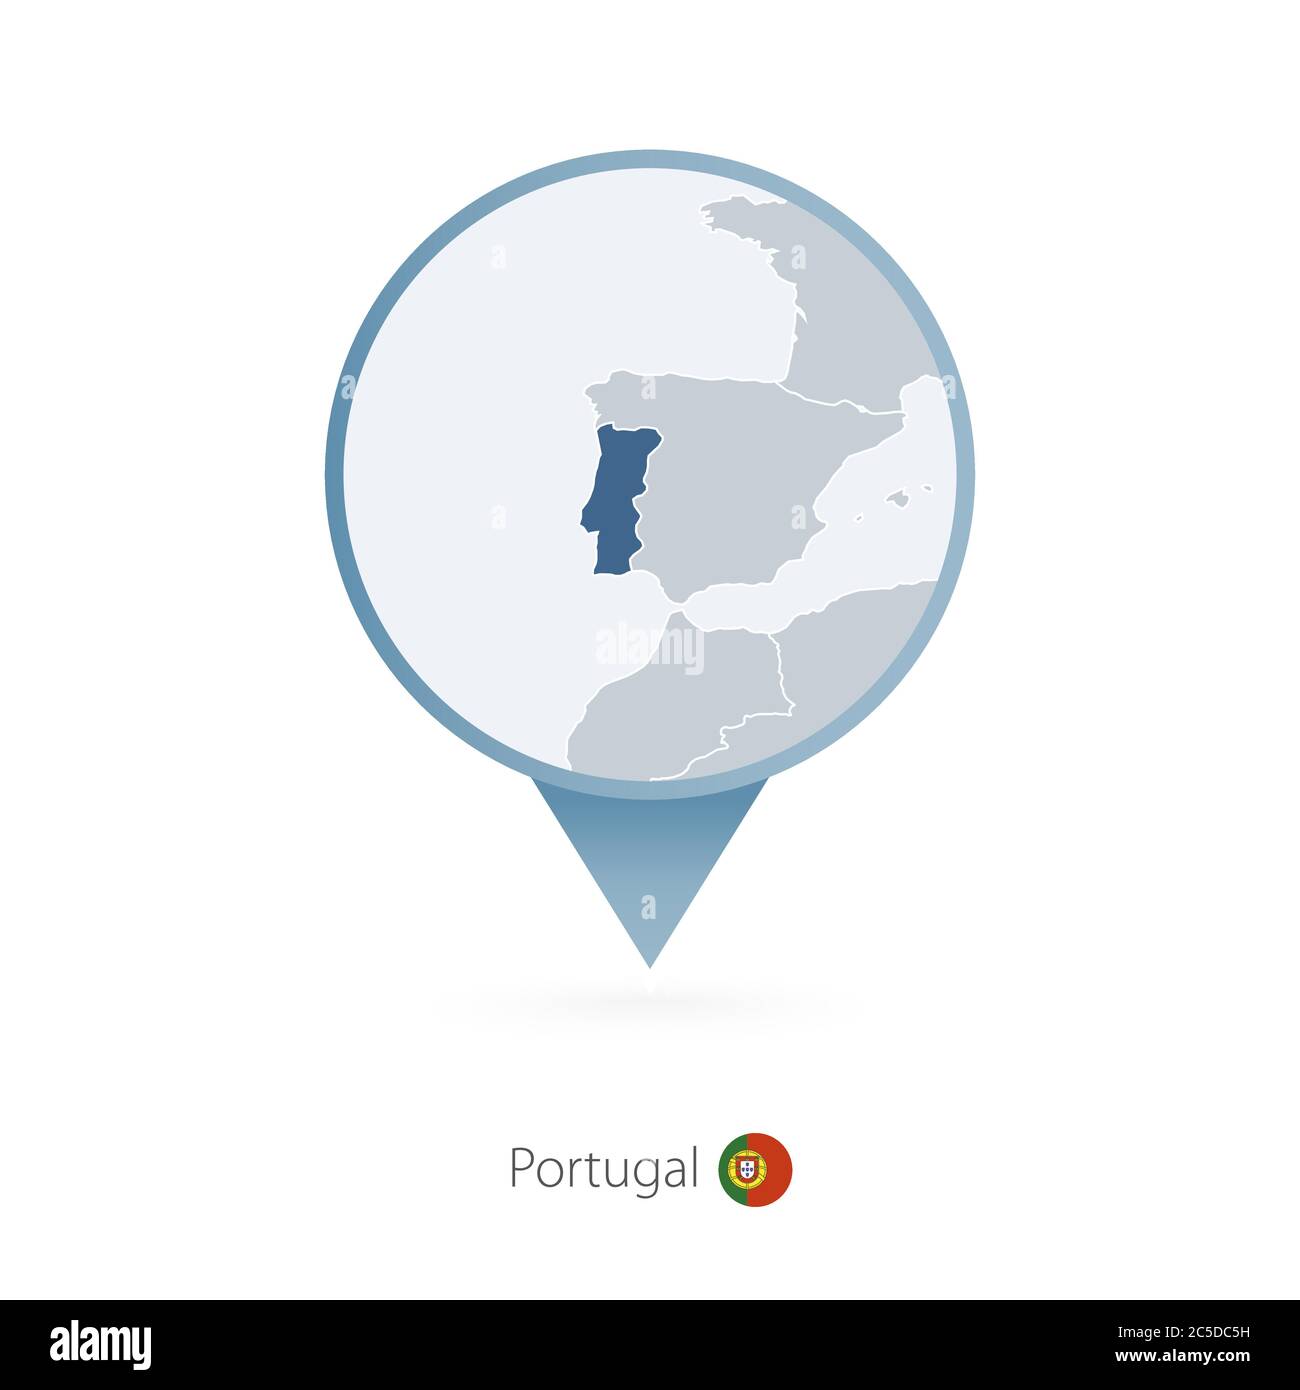 Map pin with detailed map of Portugal and neighboring countries. Stock Vector